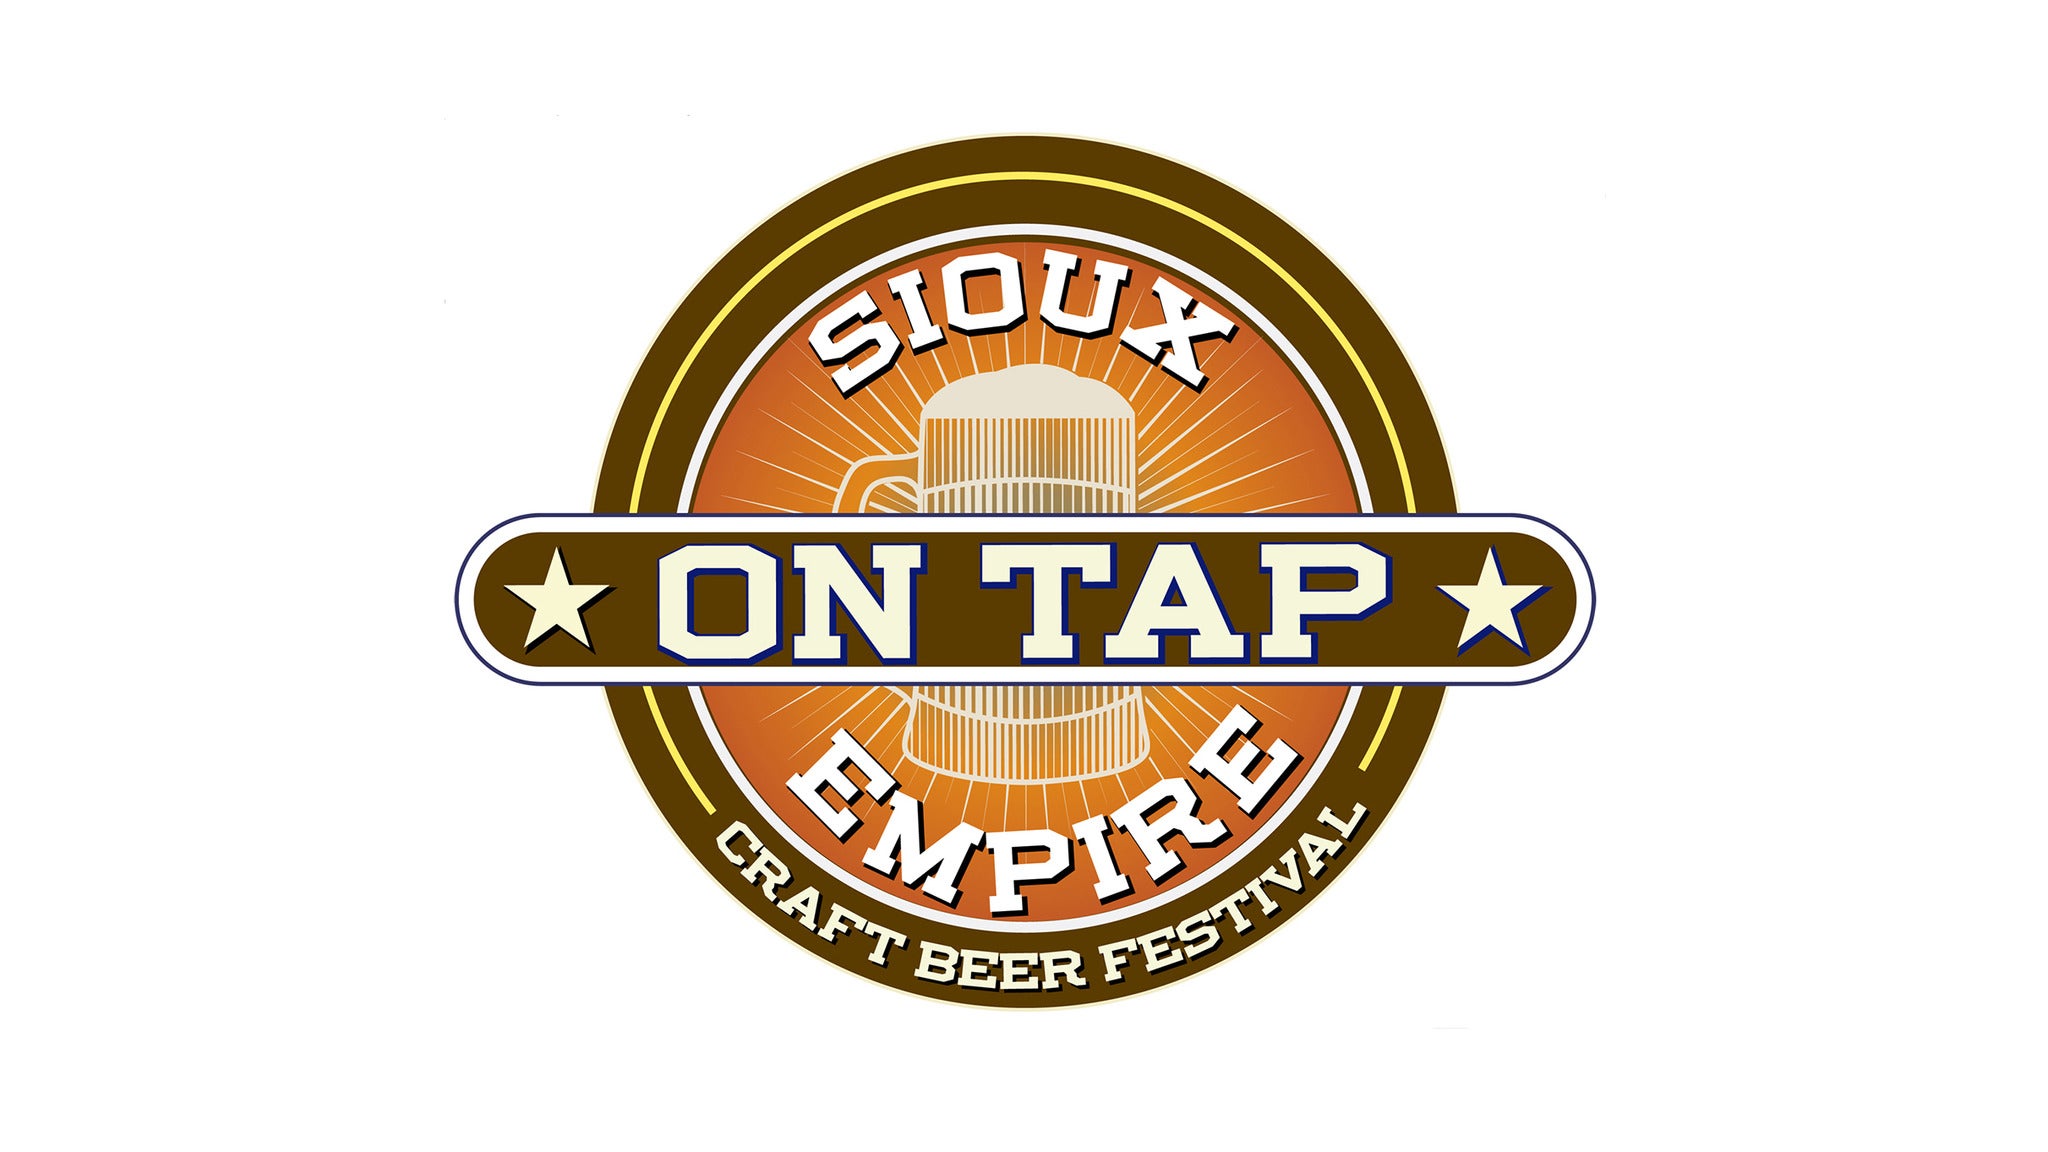 Sioux Empire On Tap 2023- 5pm Session in Sioux Falls promo photo for Special Sale 11 / 29 2 / 5 presale offer code